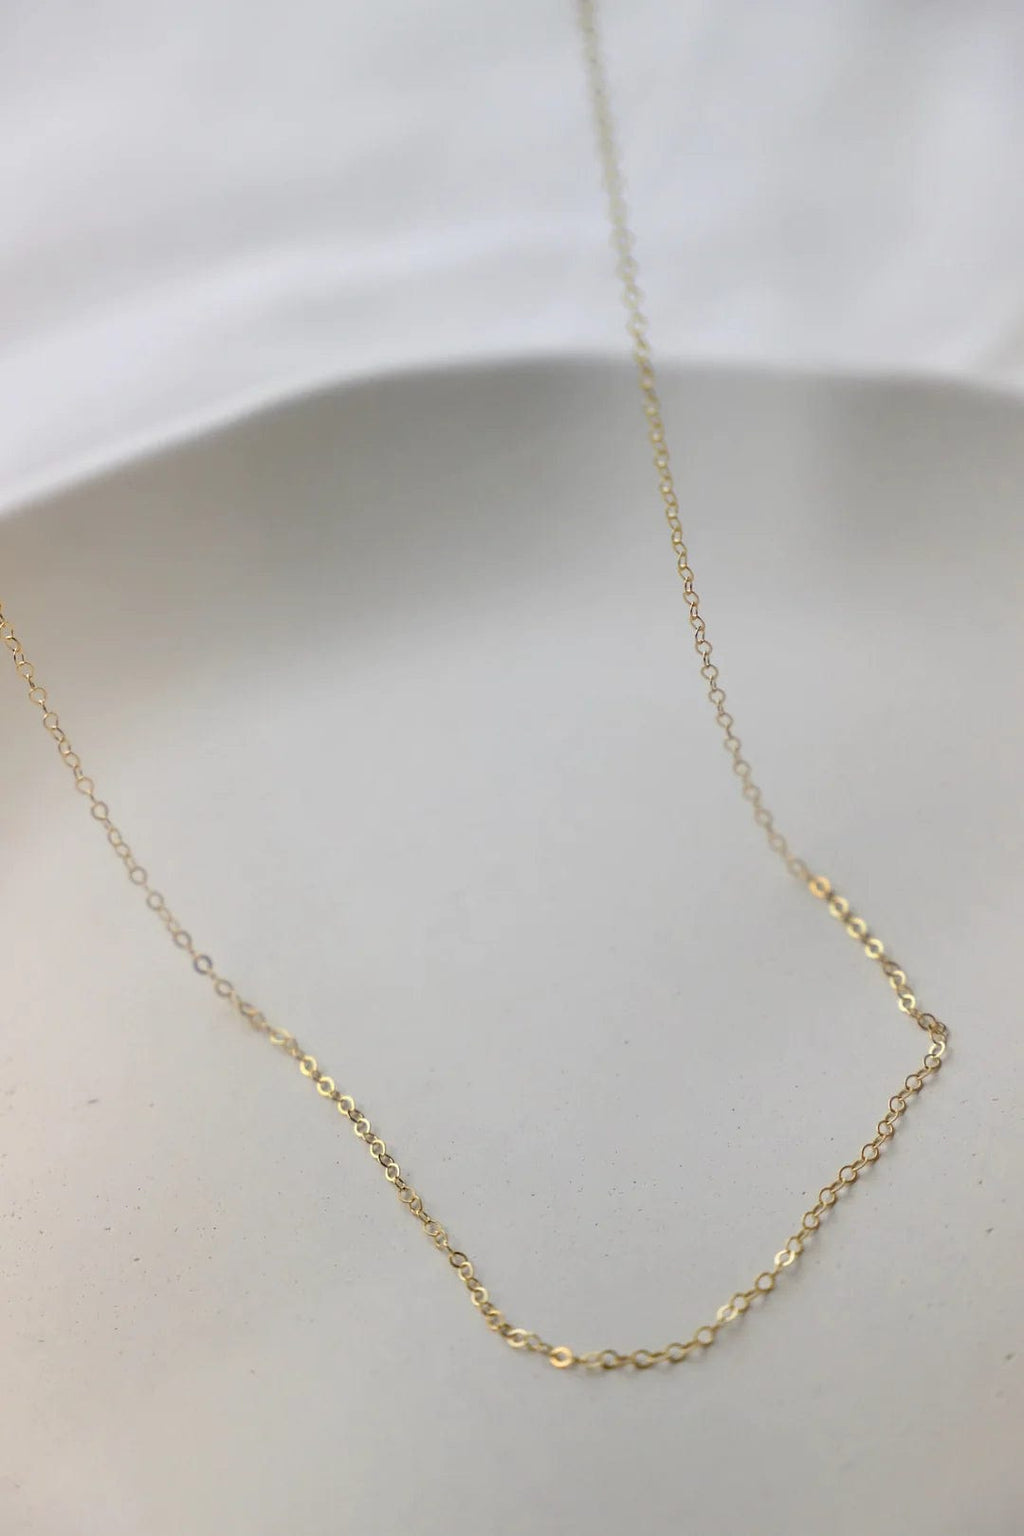 Eiluj Beauty Gold Filled Cable Chain- 18"